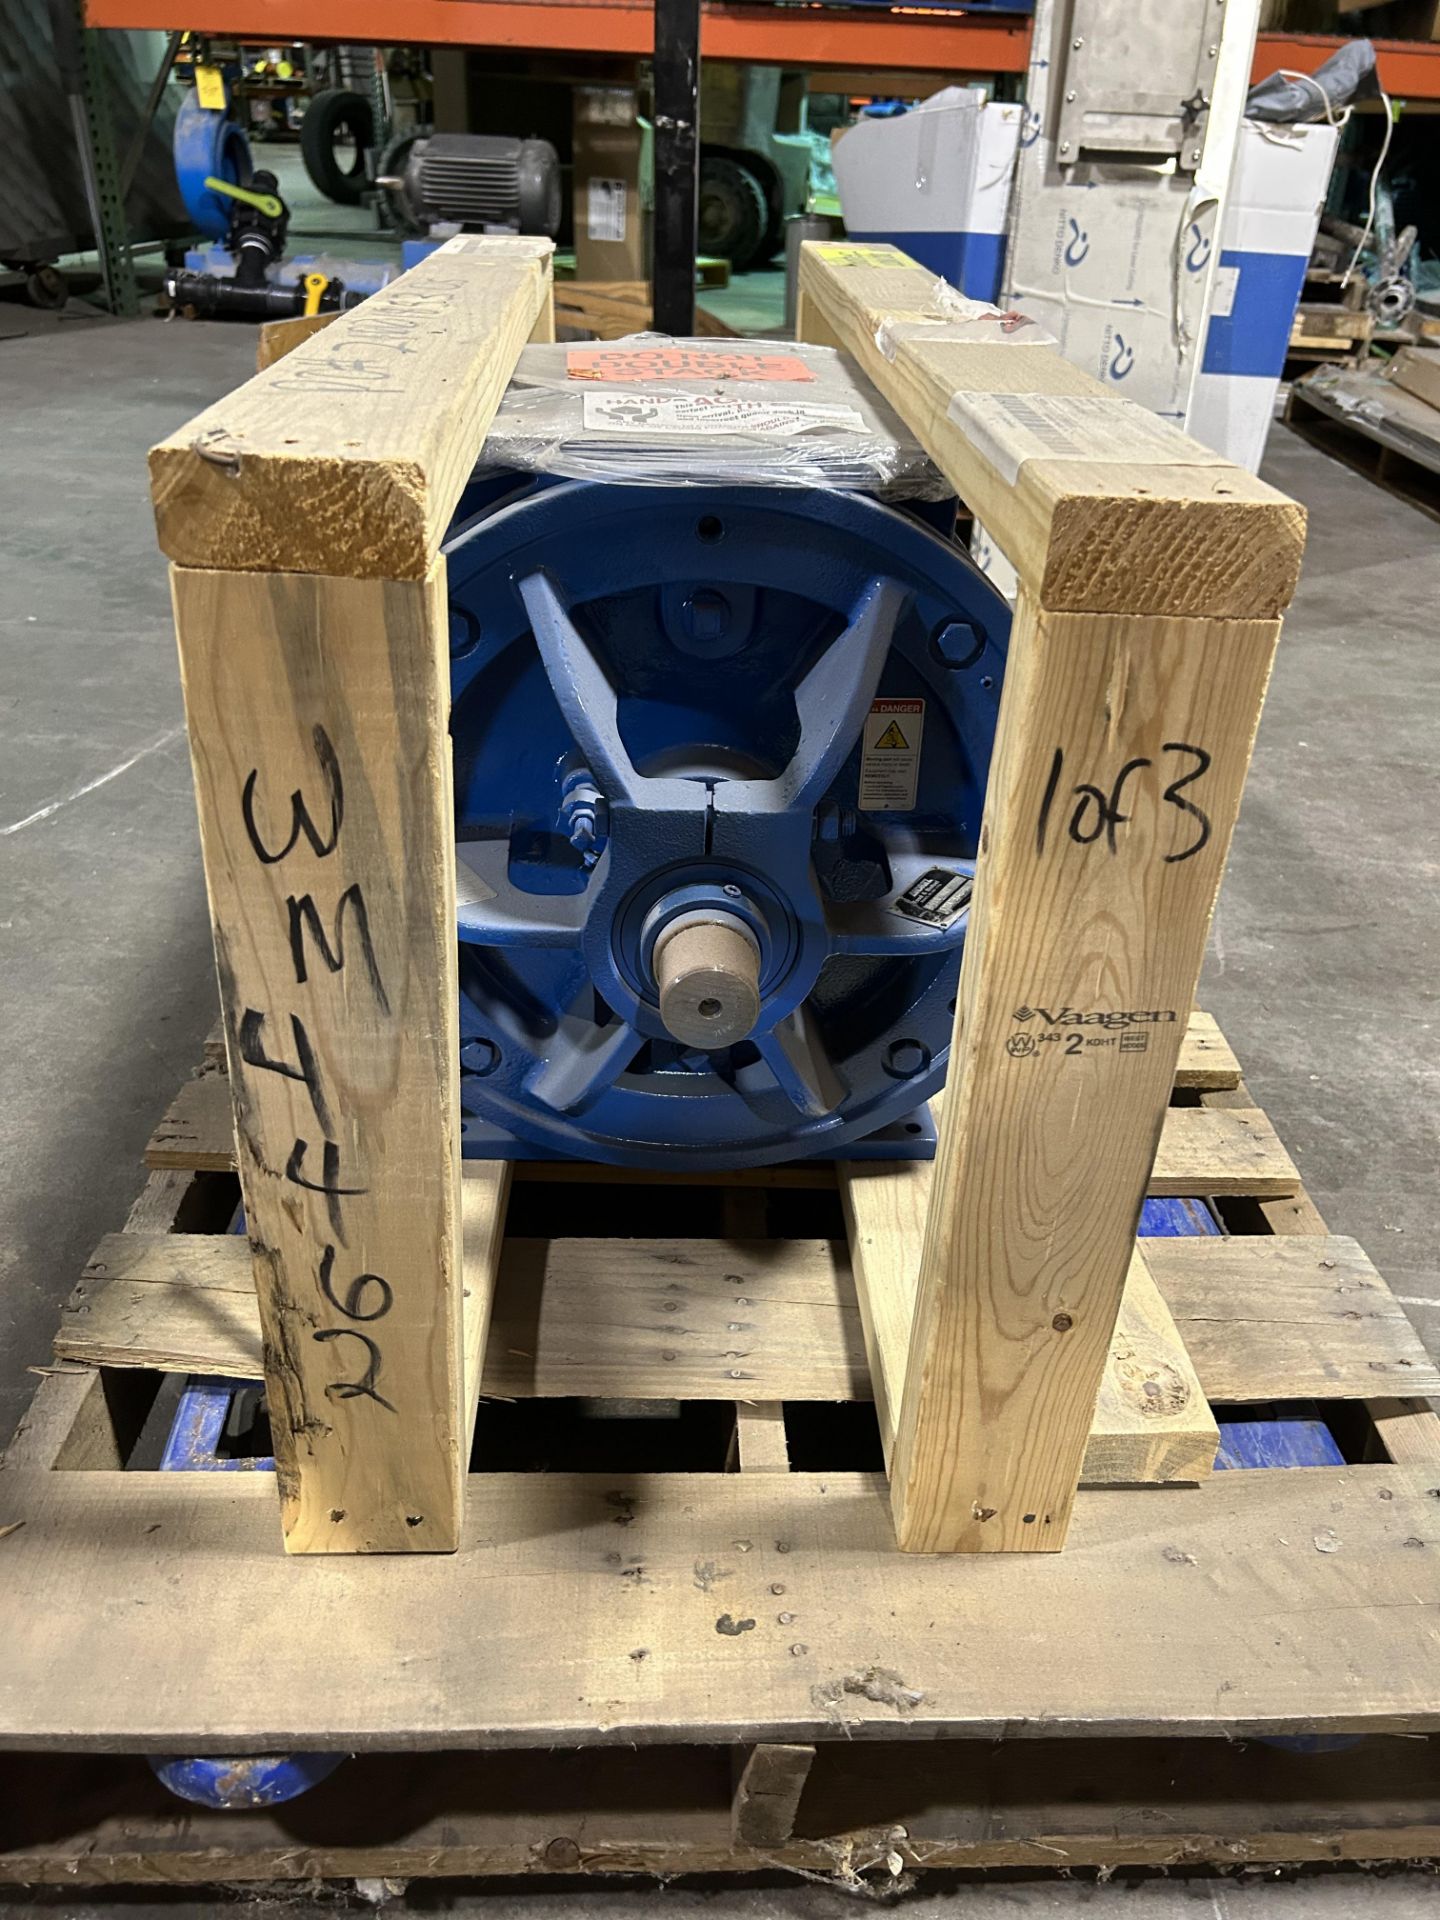 Andritz Rotary Valve , Rigging & Loading Fee: $125 - Image 4 of 9